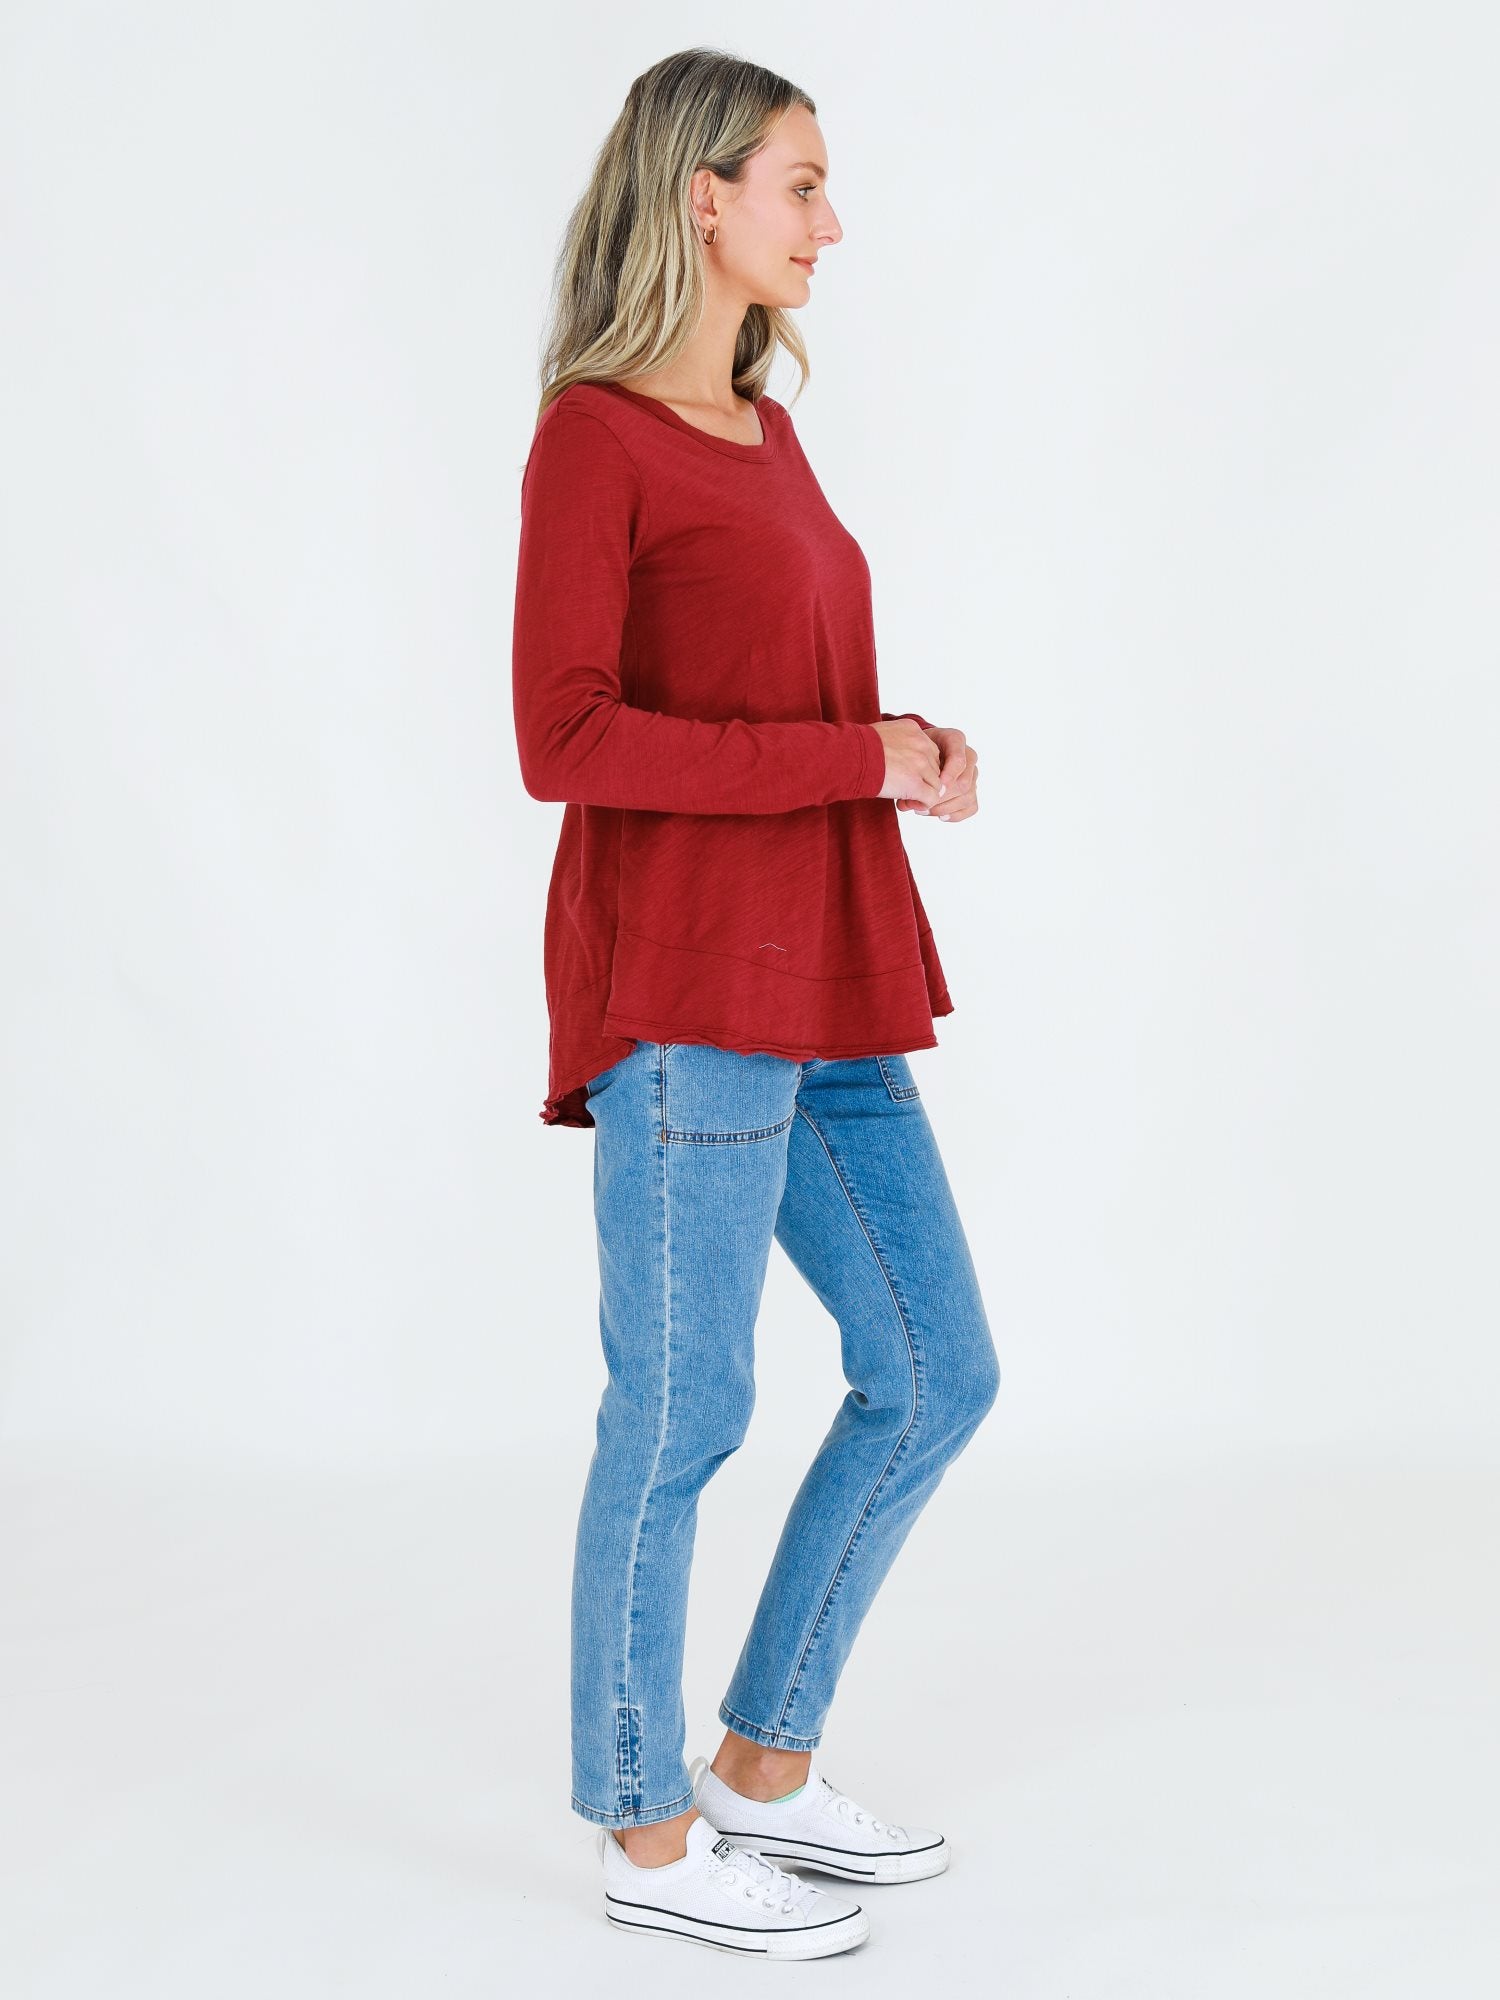 red shirt plus size #color_burgundy